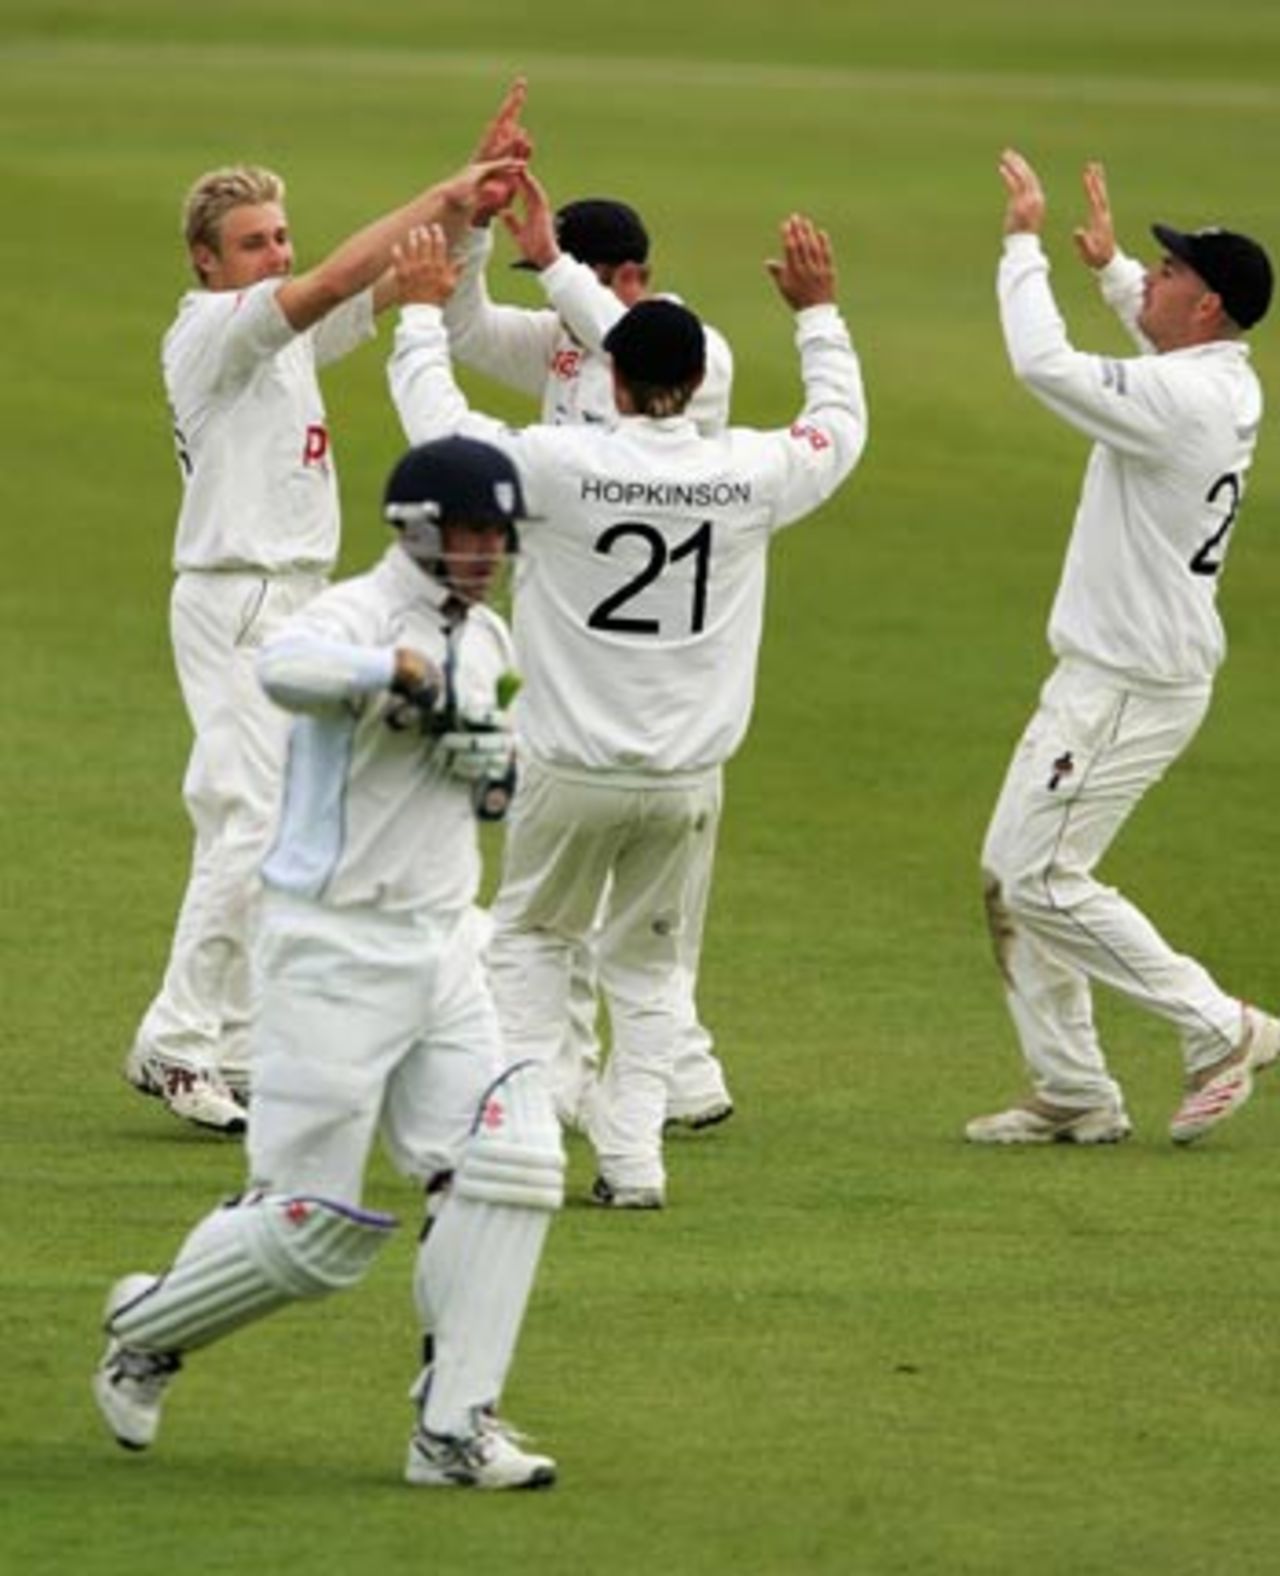 Luke Wright celebrates Jimmy Maher's wicket, Durham v Sussex, Chester-le-Street, May 23, 2006